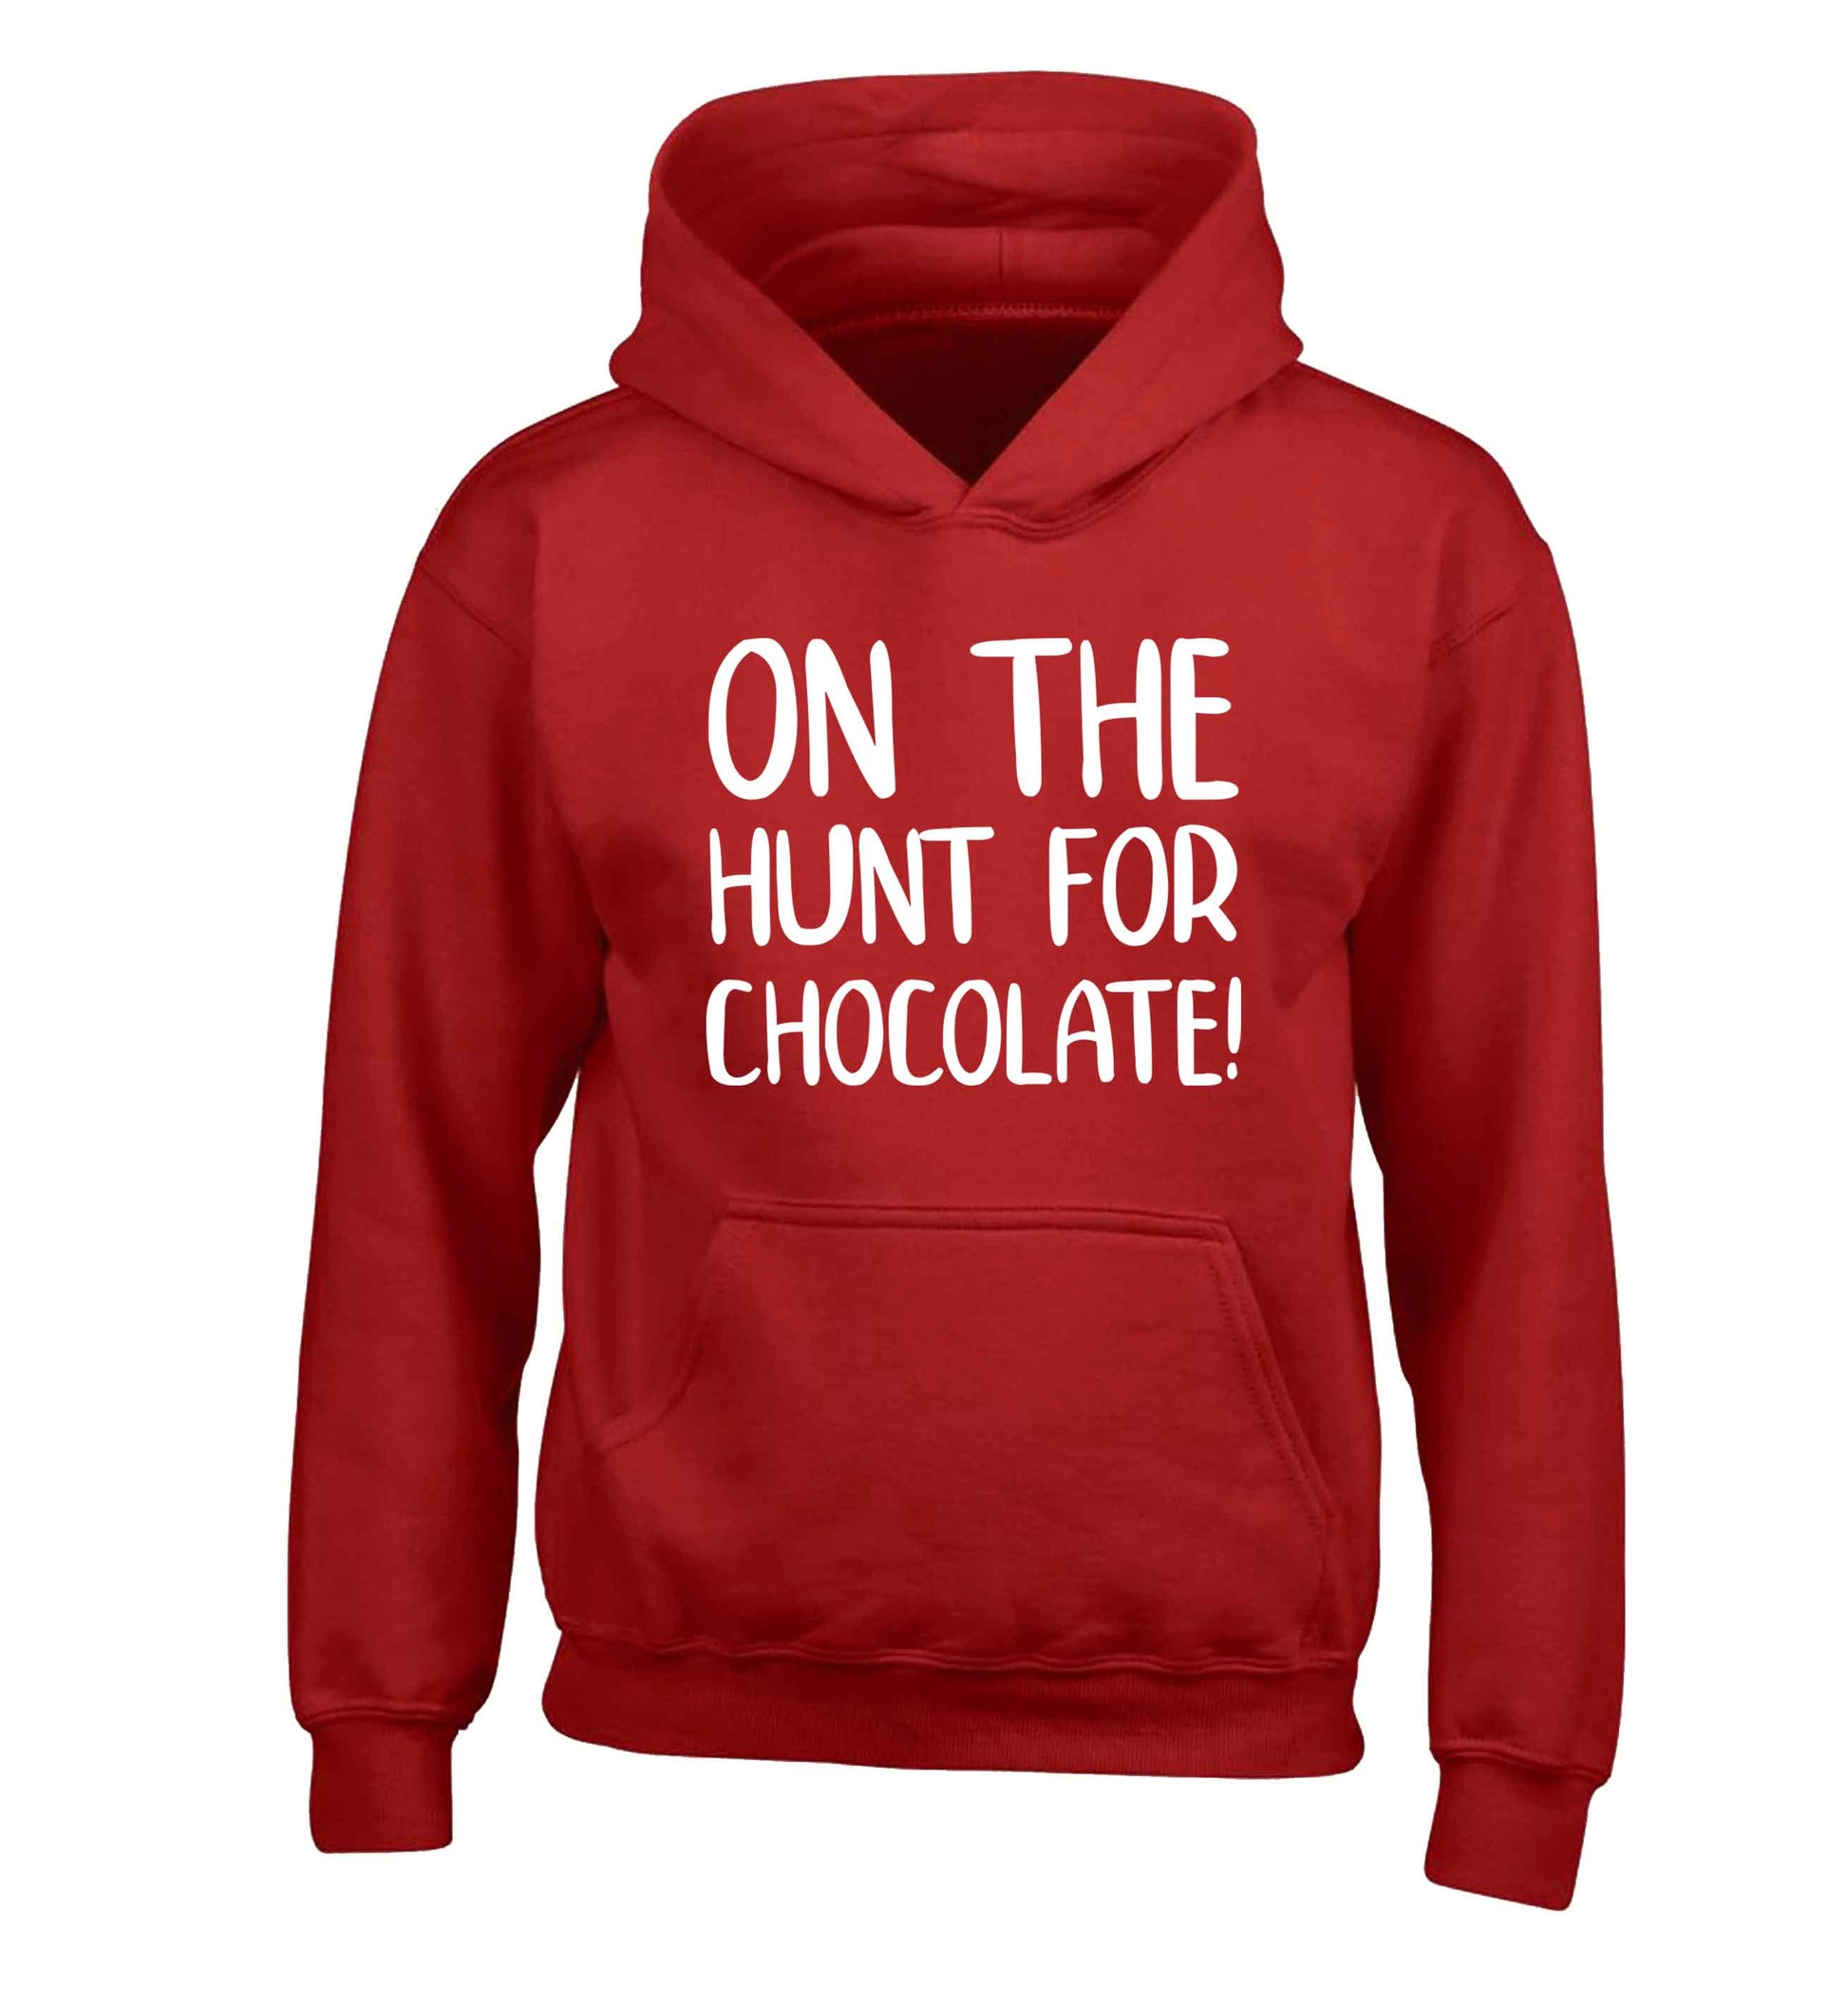 On the hunt for chocolate! children's red hoodie 12-13 Years